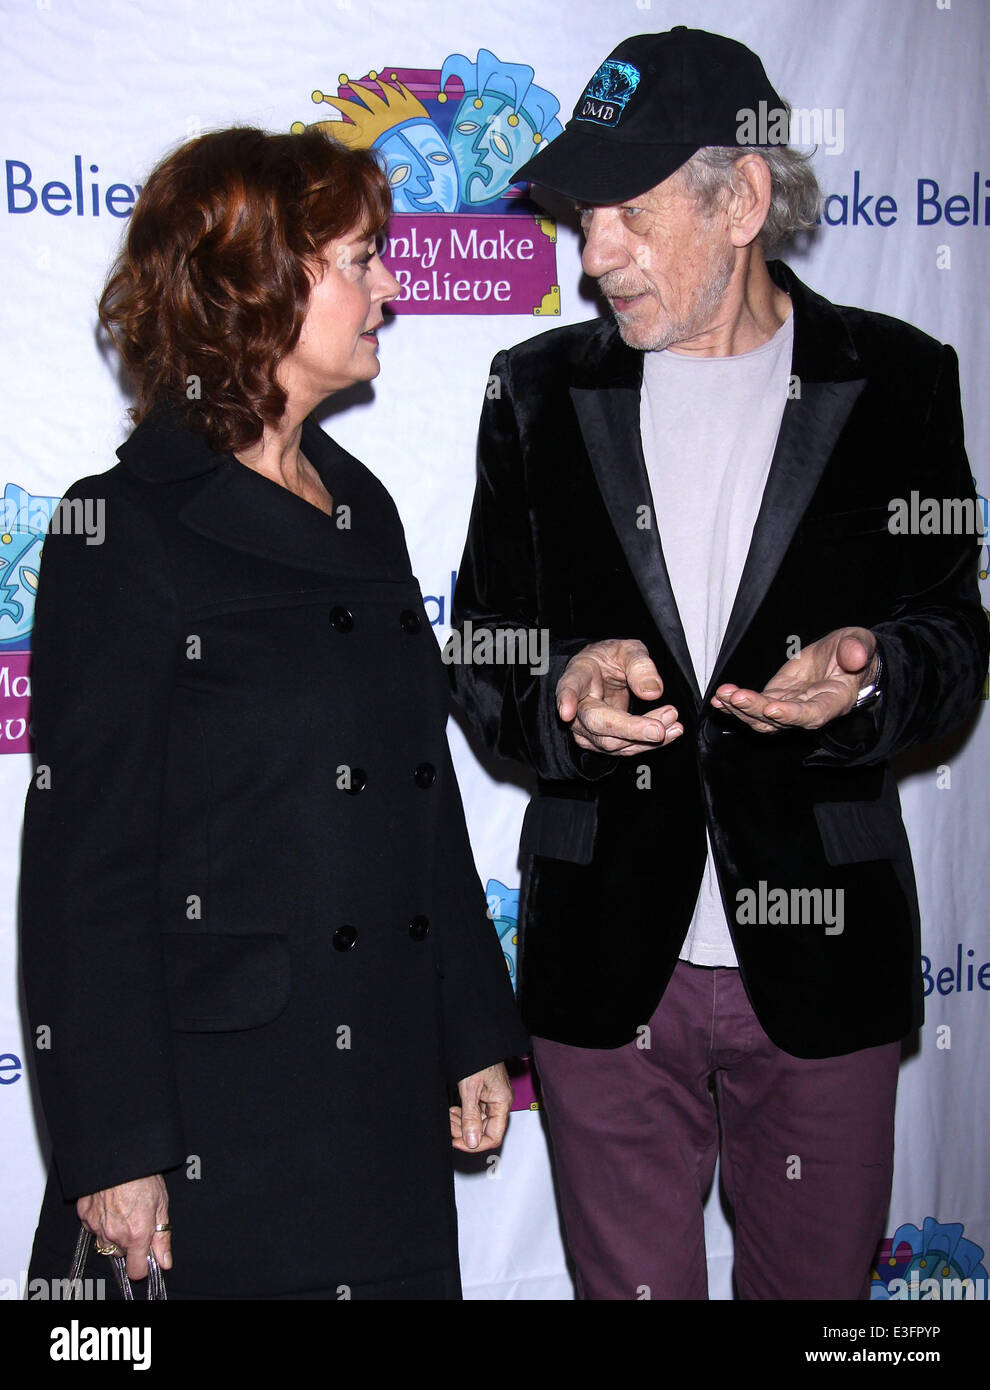 The 14th Annual Only Make Believe Gala, held at the Jacobs Theatre-Arrivals.  Featuring: Susan Sarandon,Ian McKellen Where: New York, NY, United States When: 05 Nov 2013 Stock Photo